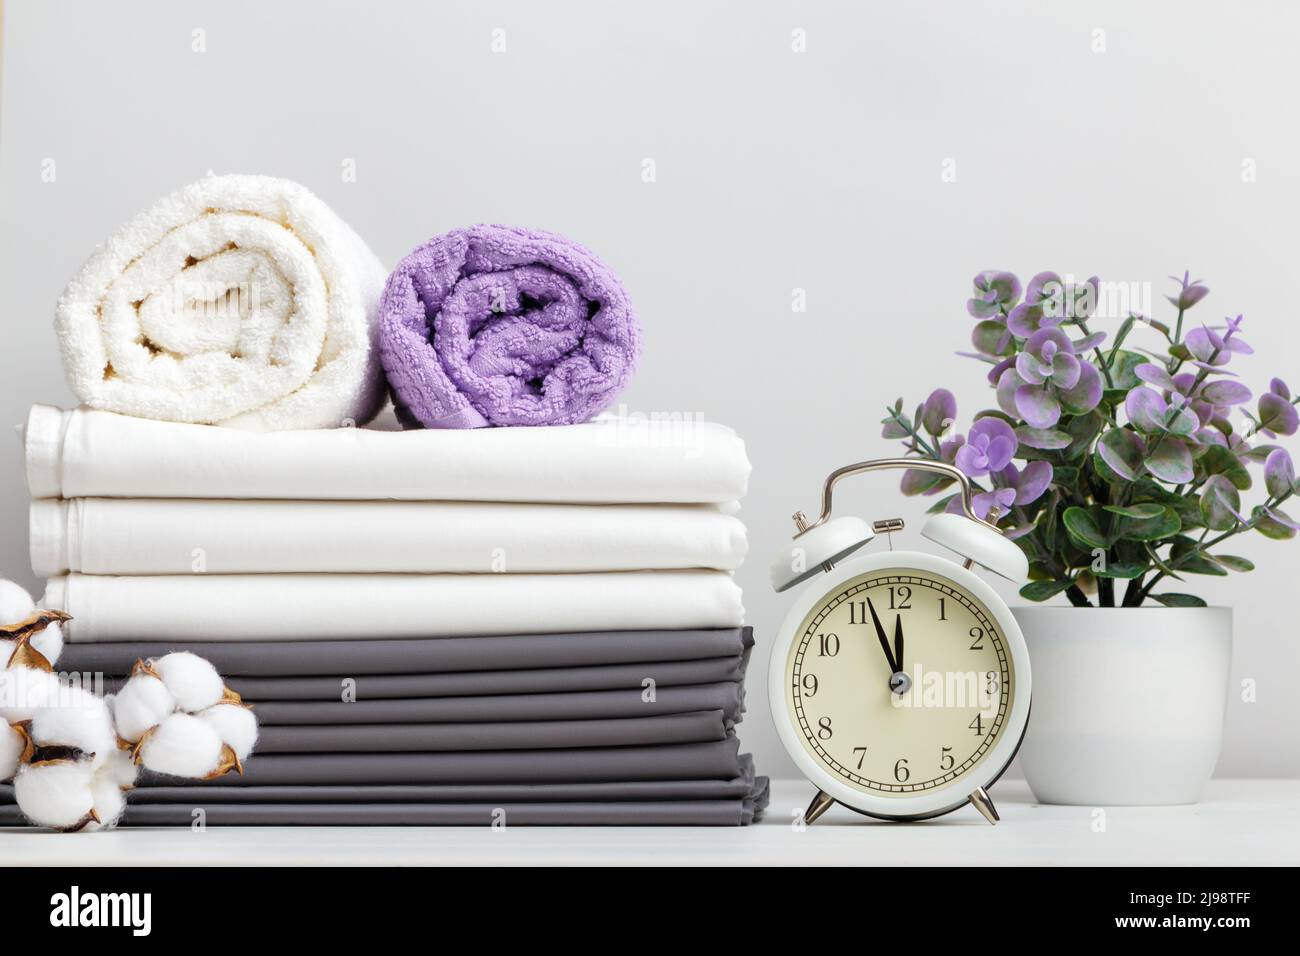 Stack of bed linen, bed sheets and towels with cotton branch and potted plant alarm clock on table Stock Photo